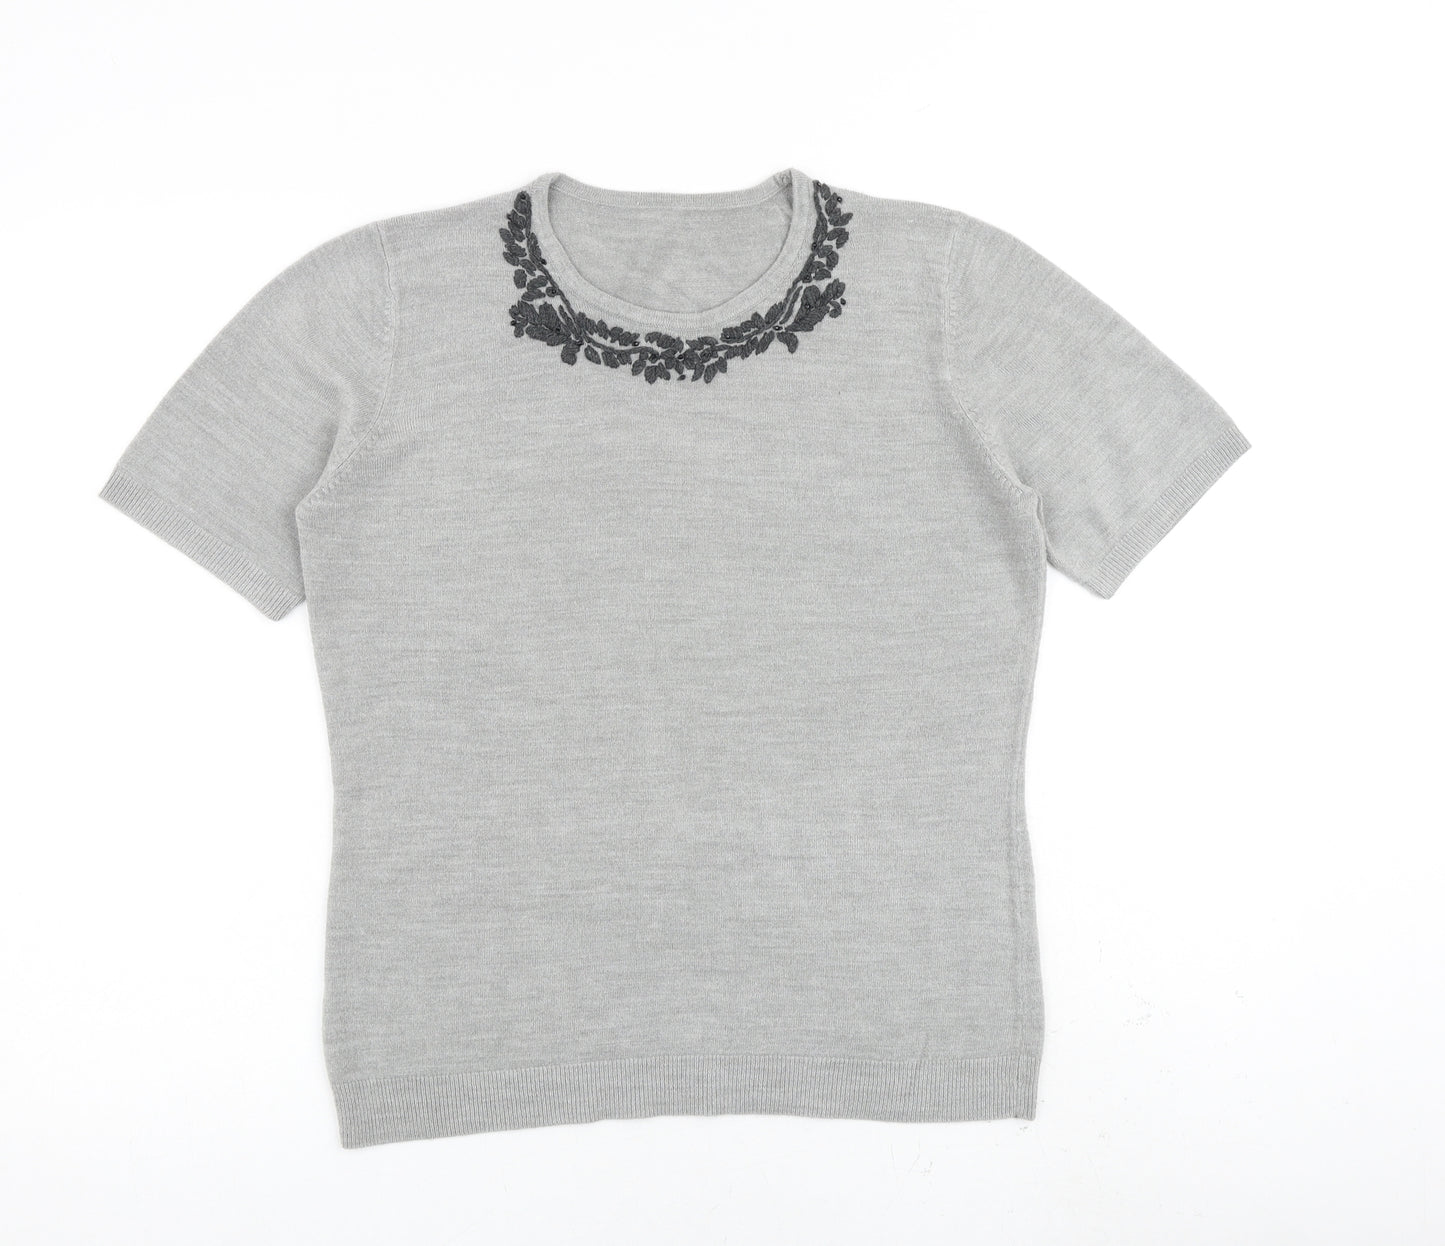 BHS Womens Grey Acrylic Basic T-Shirt Size 12 Round Neck - Floral Detail